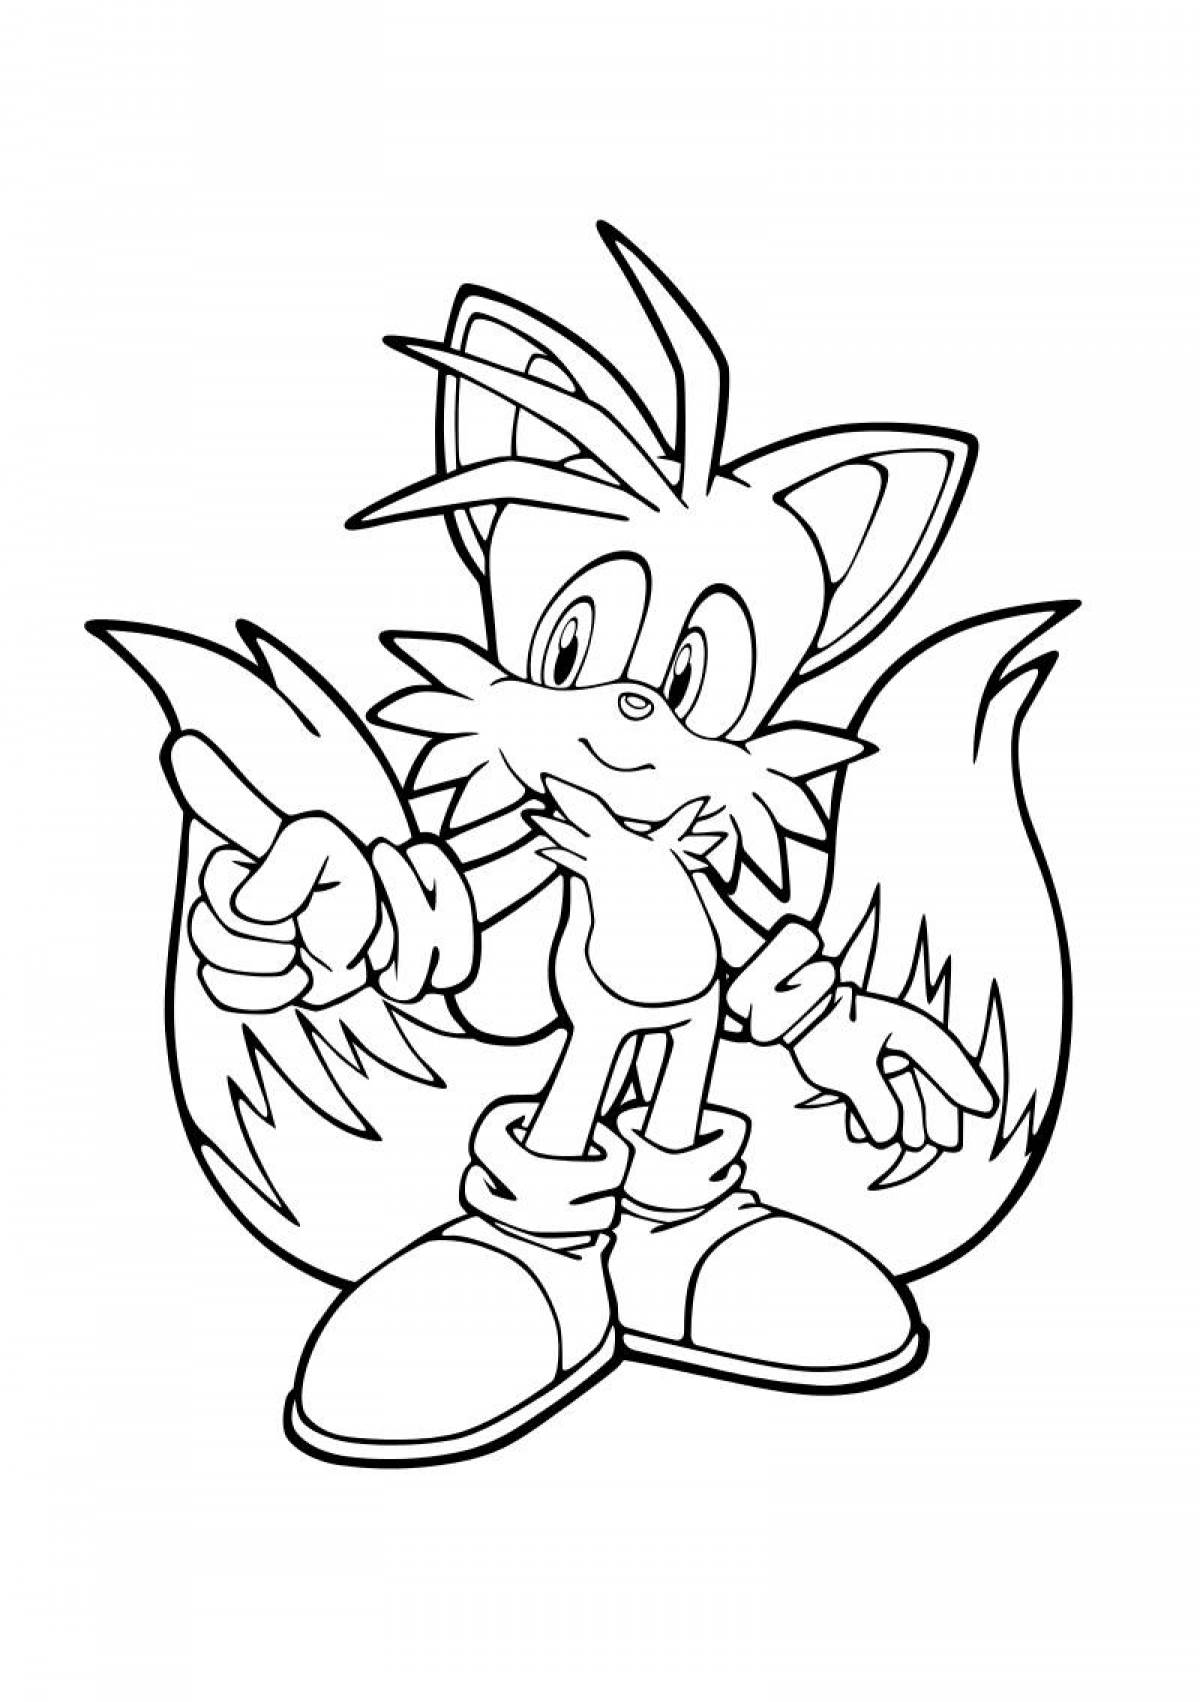 Dazzling sonic coloring book